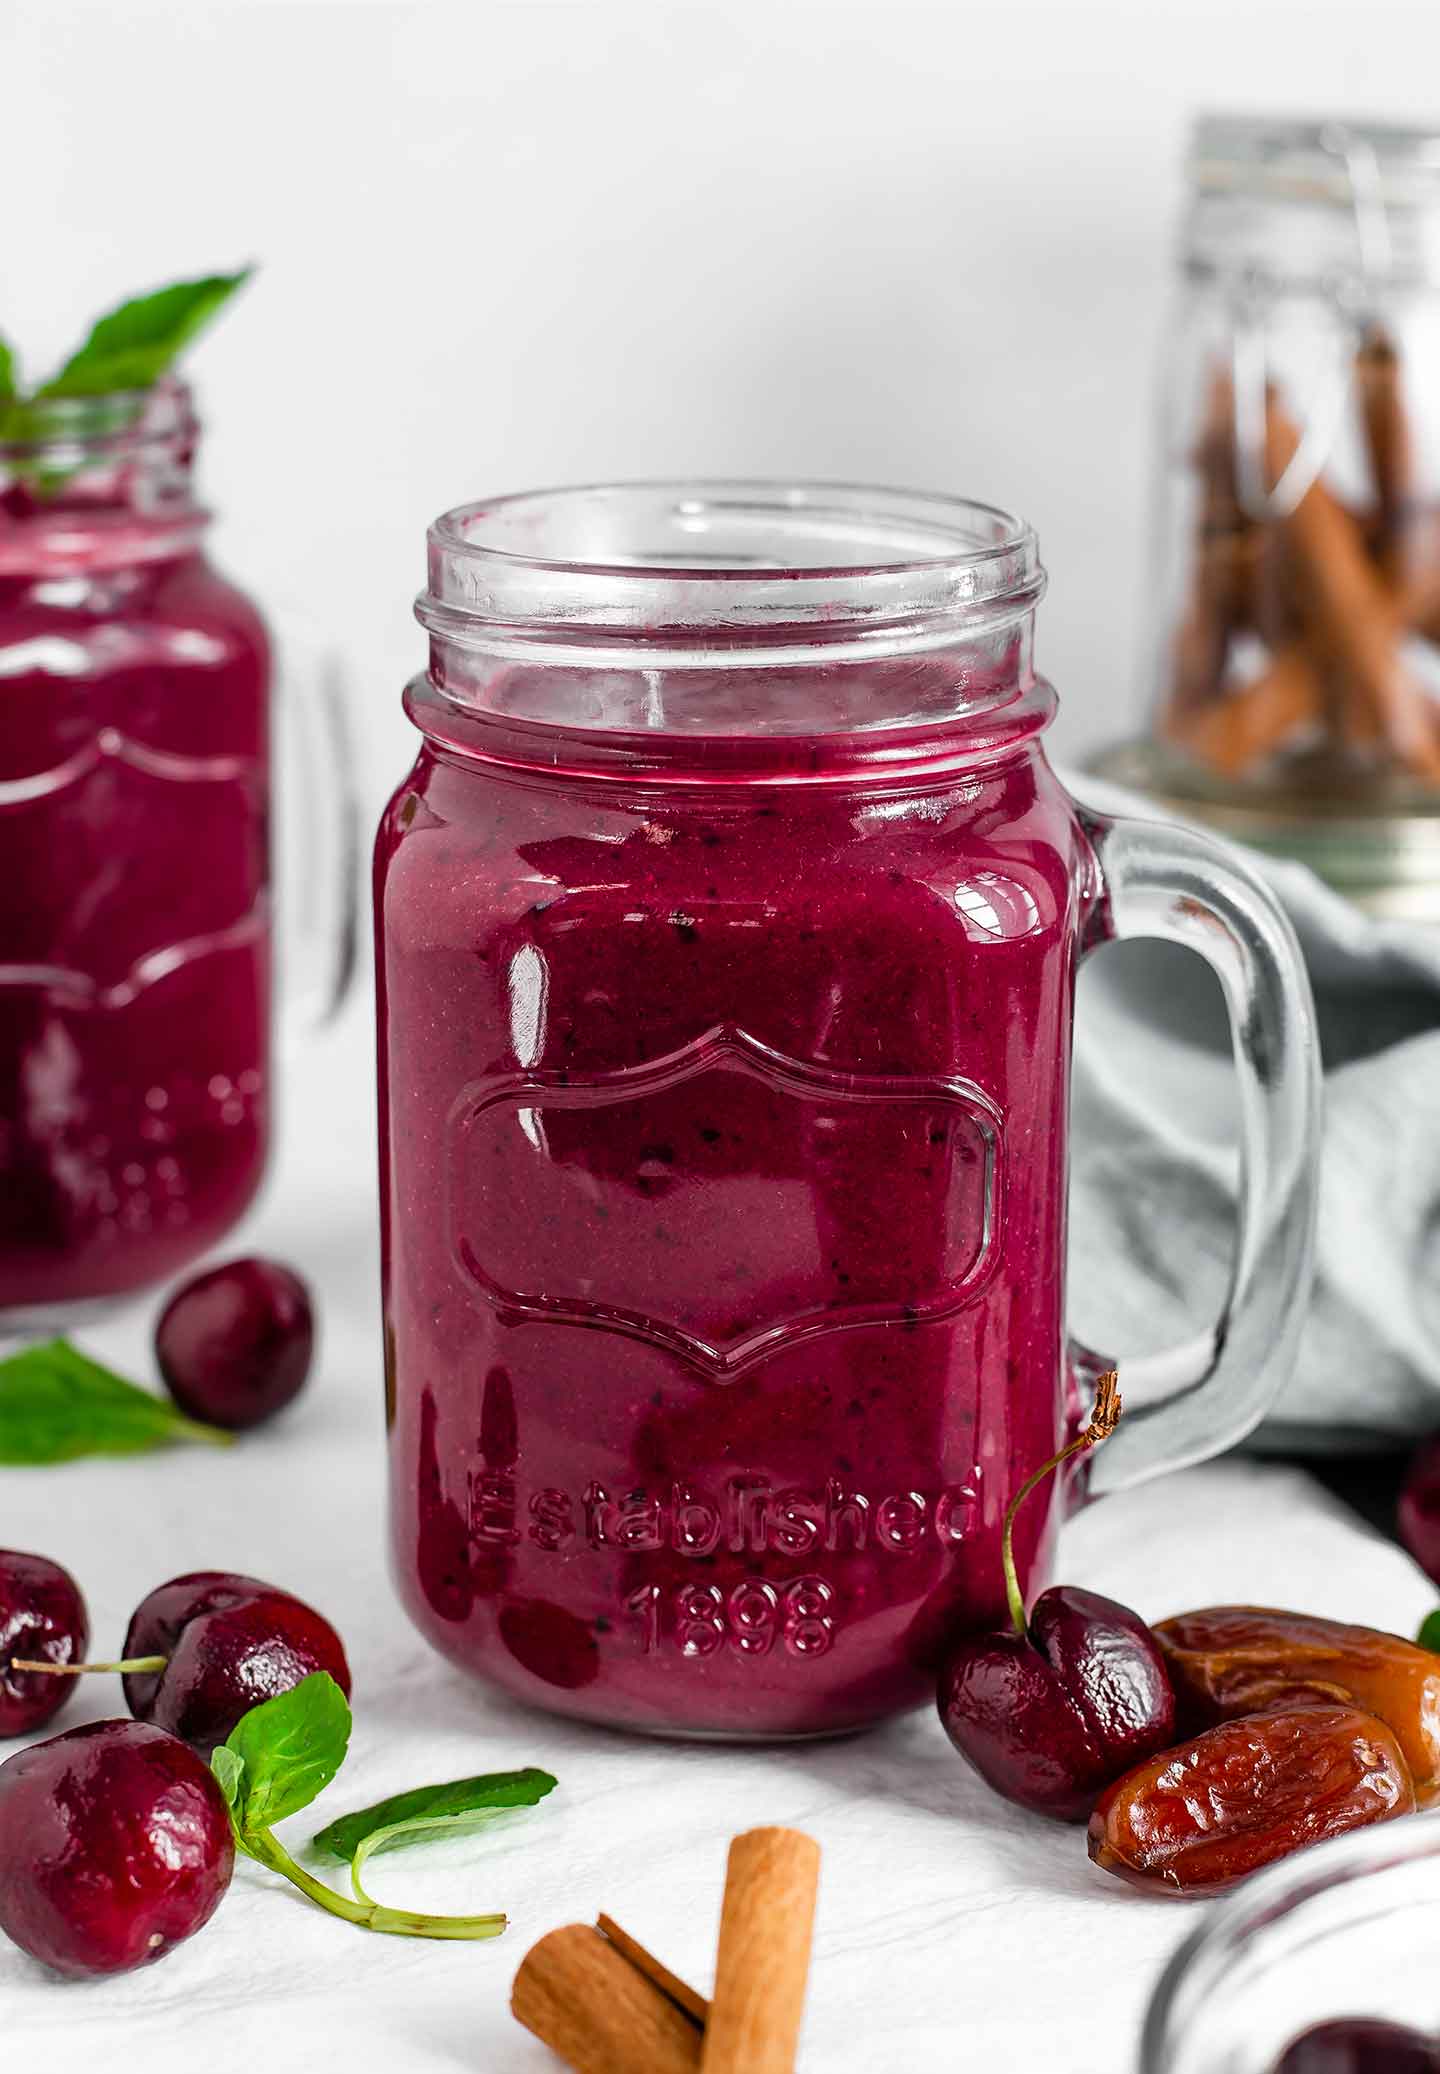 Side view of chocolate beet smoothie in a glass jar with cinnamon sticks, cherries, and dates scattered around. Another smoothie with a mint leaf stands in the background.